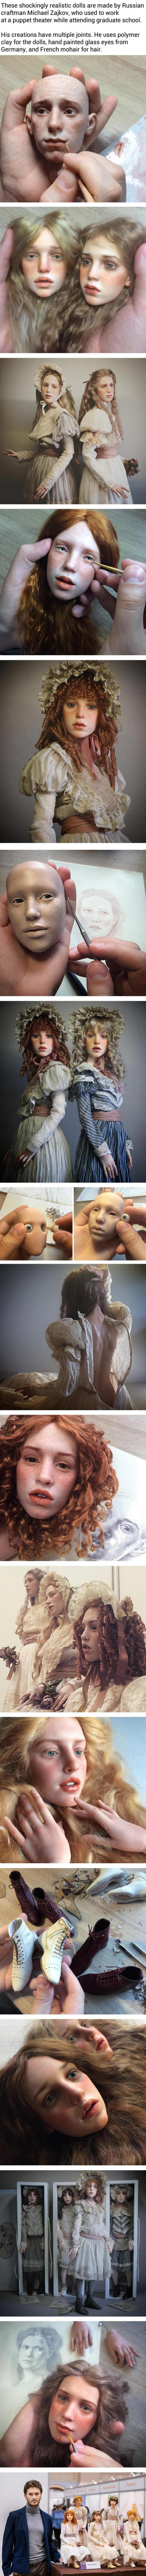 These+Stunningly+Realistic+Doll+Faces+Will+Make+Your+Skin+Crawl